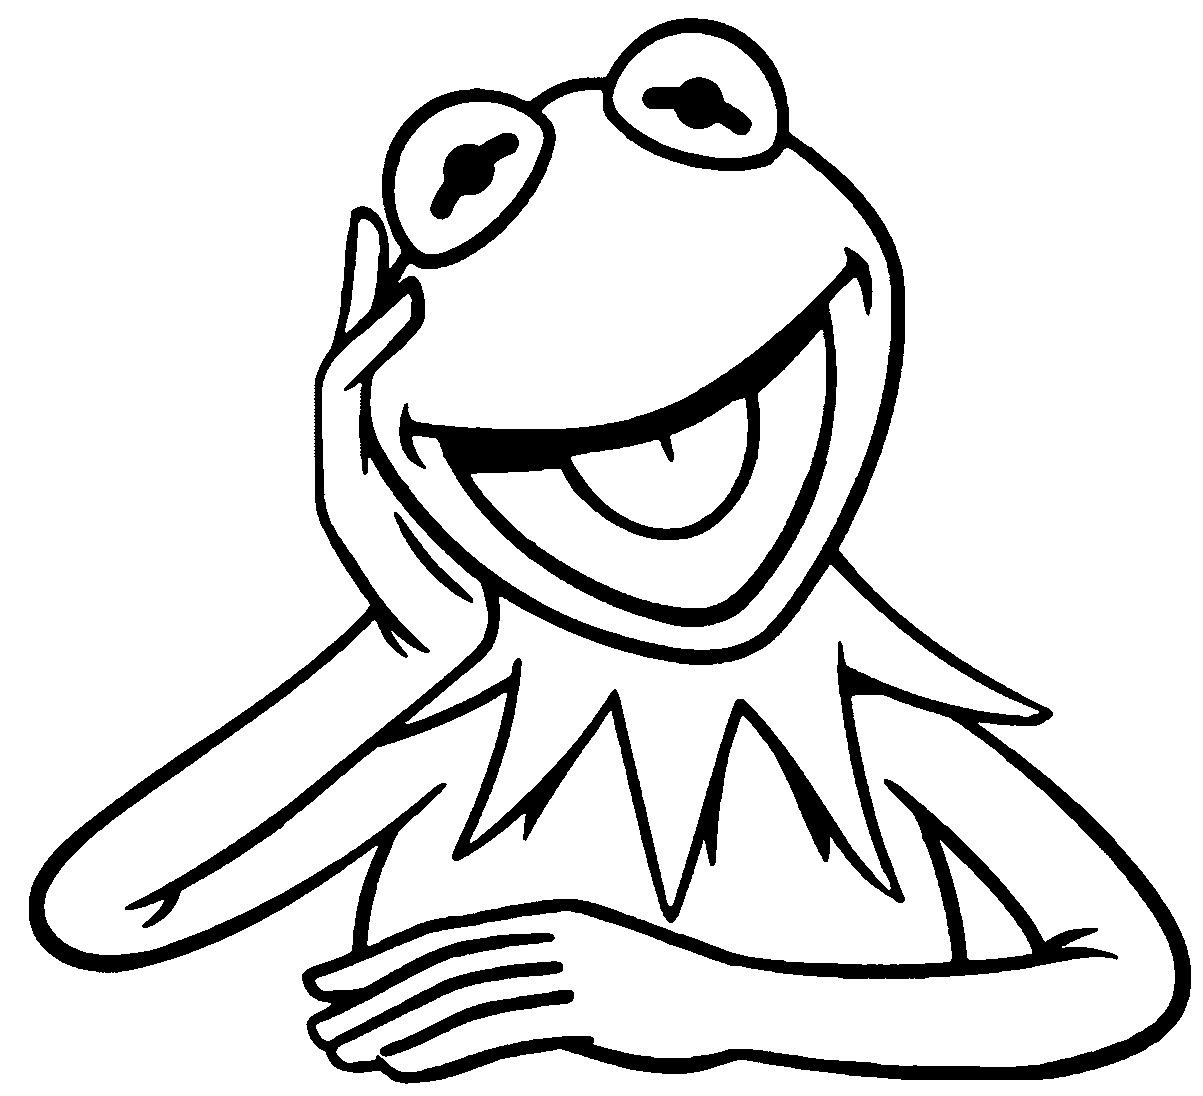 The muppets kermit the frog listen coloring pages wecoloringpage frog coloring pages animal coloring pages coloring pages